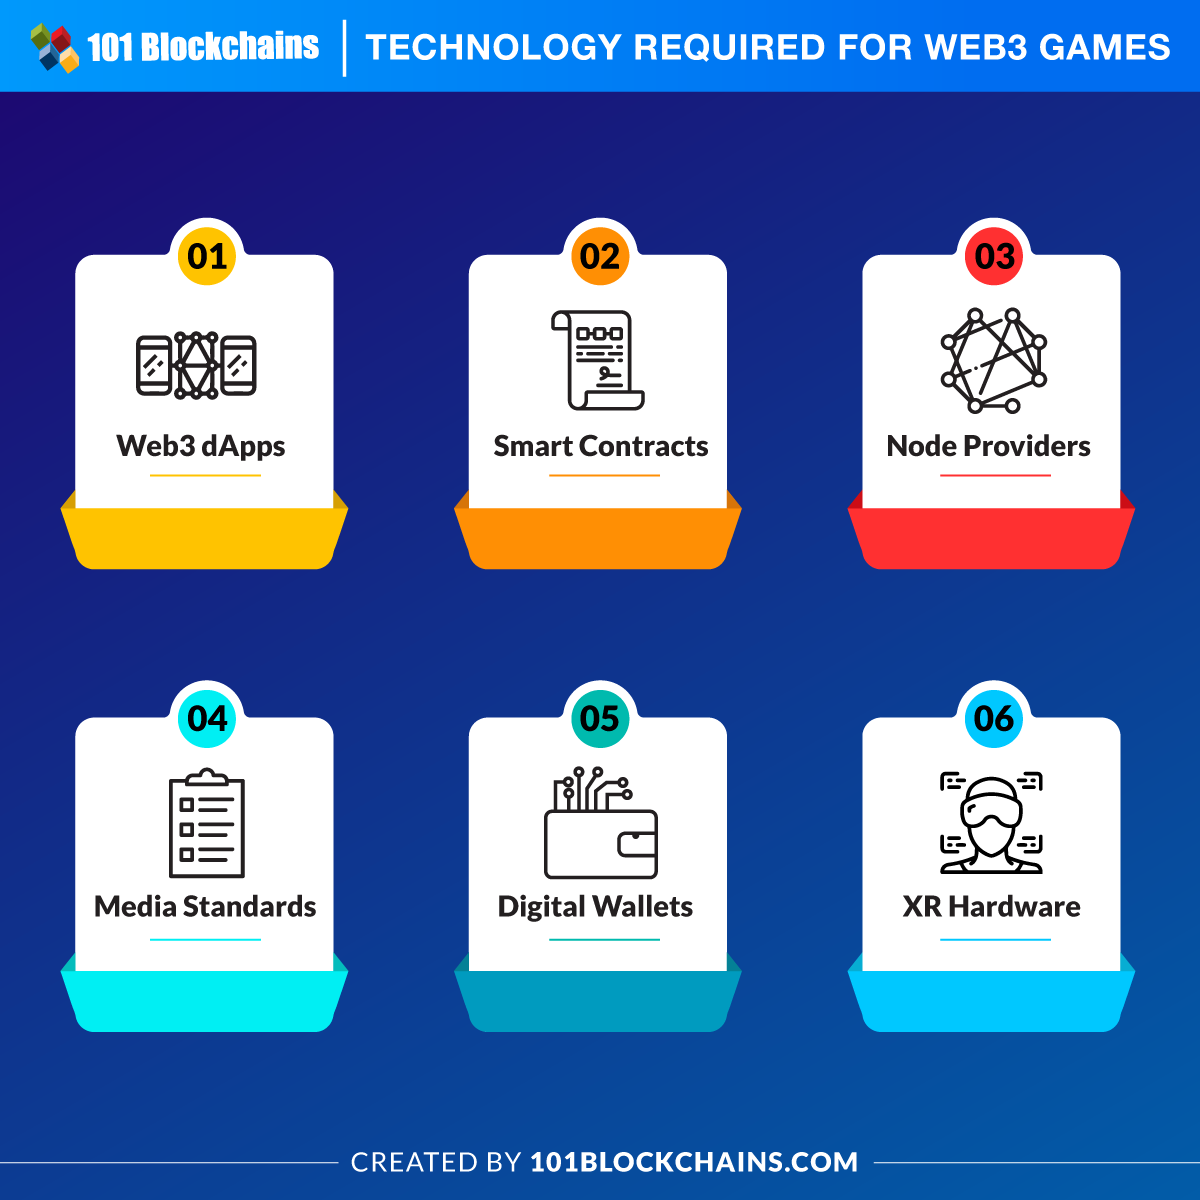 Technology Required for Web3 Games